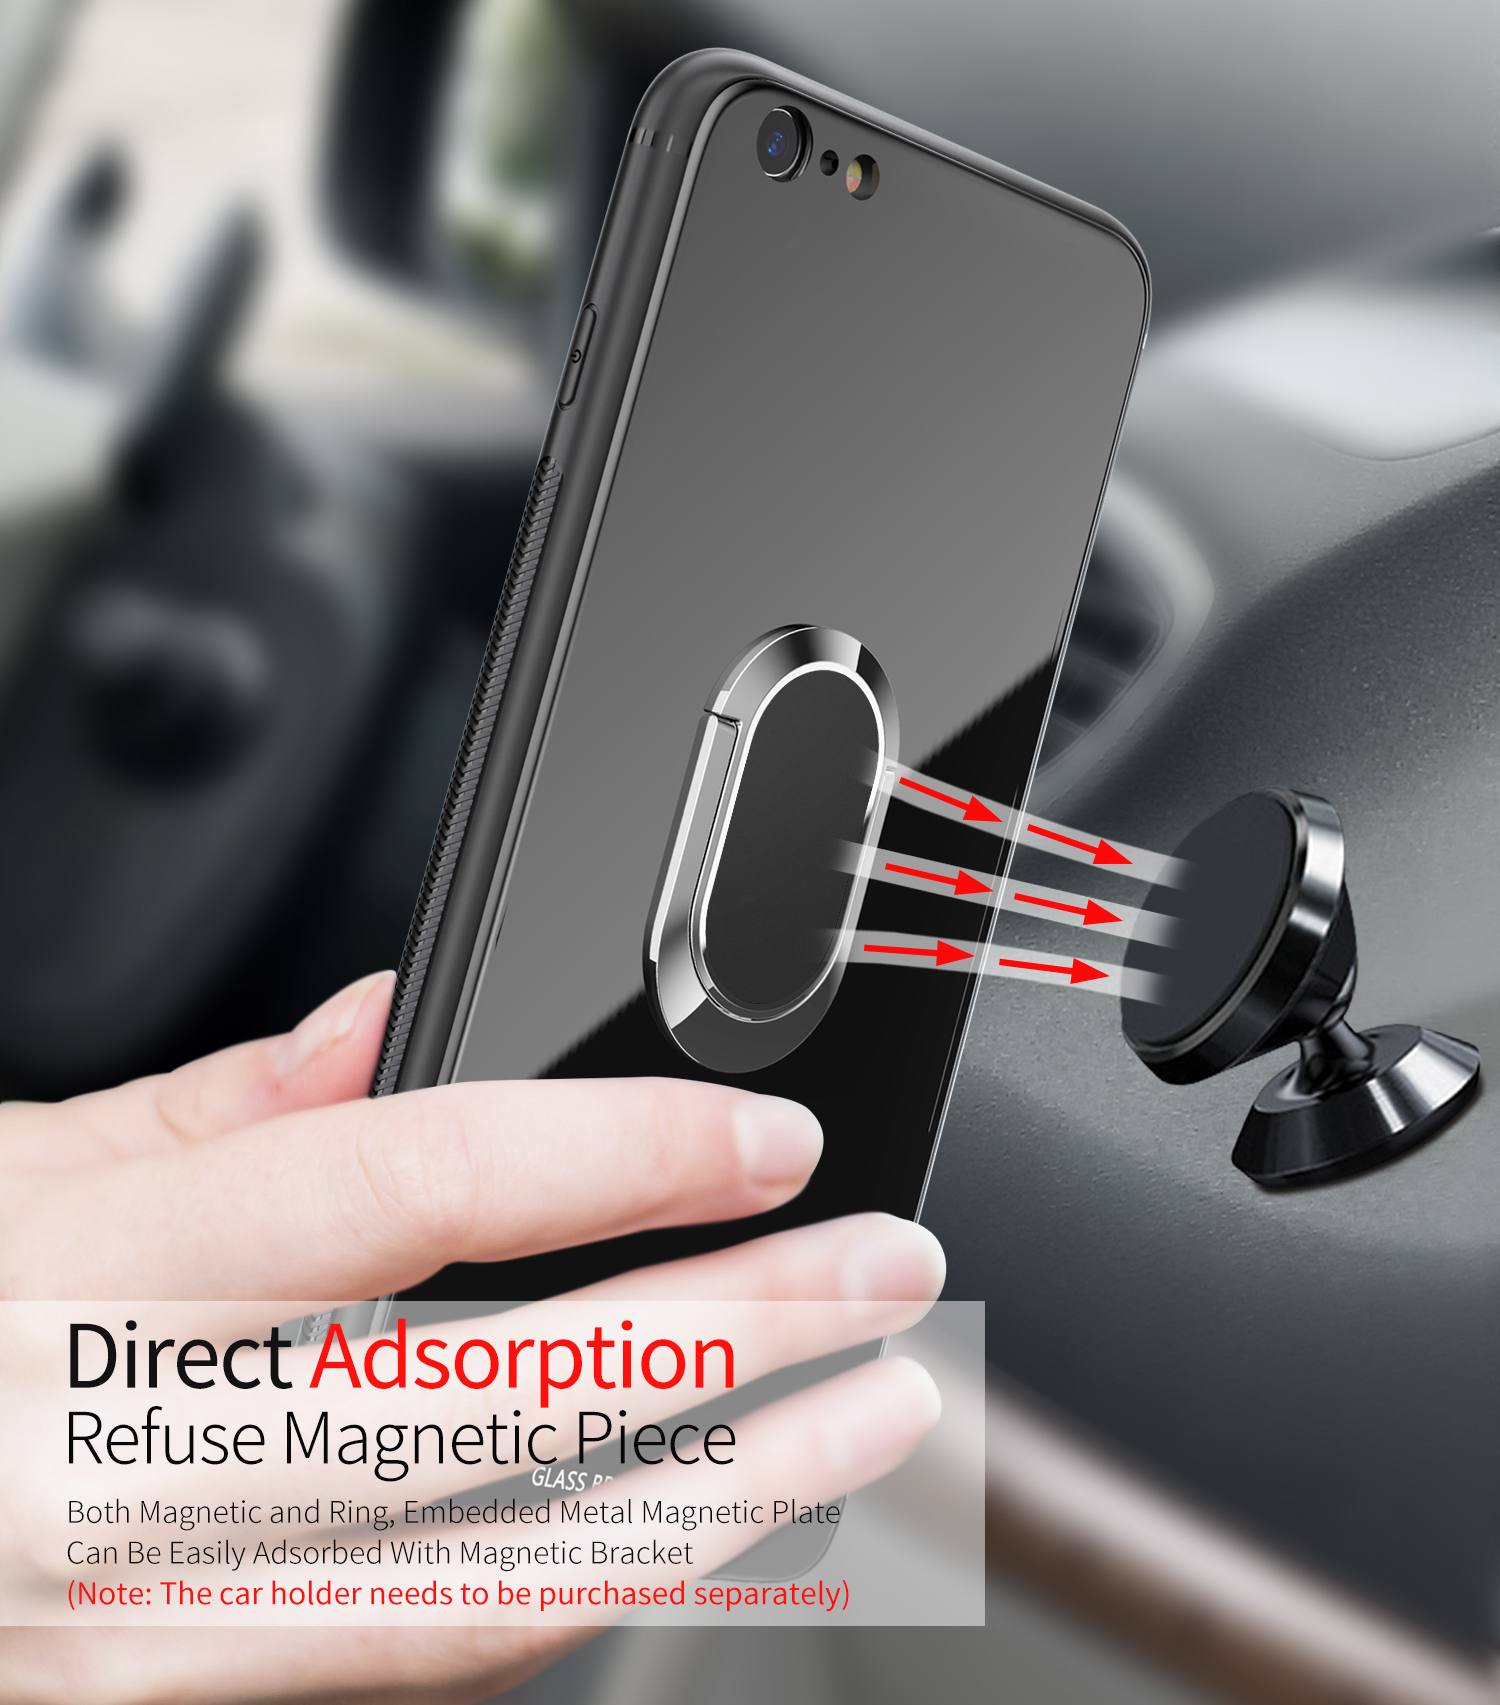 Bakeey-360deg-Rotation-Ring-Kickstand-Magnetic-Glass-Protective-Case-for-iPhone-66s6-Plus6s-Plus-1320652